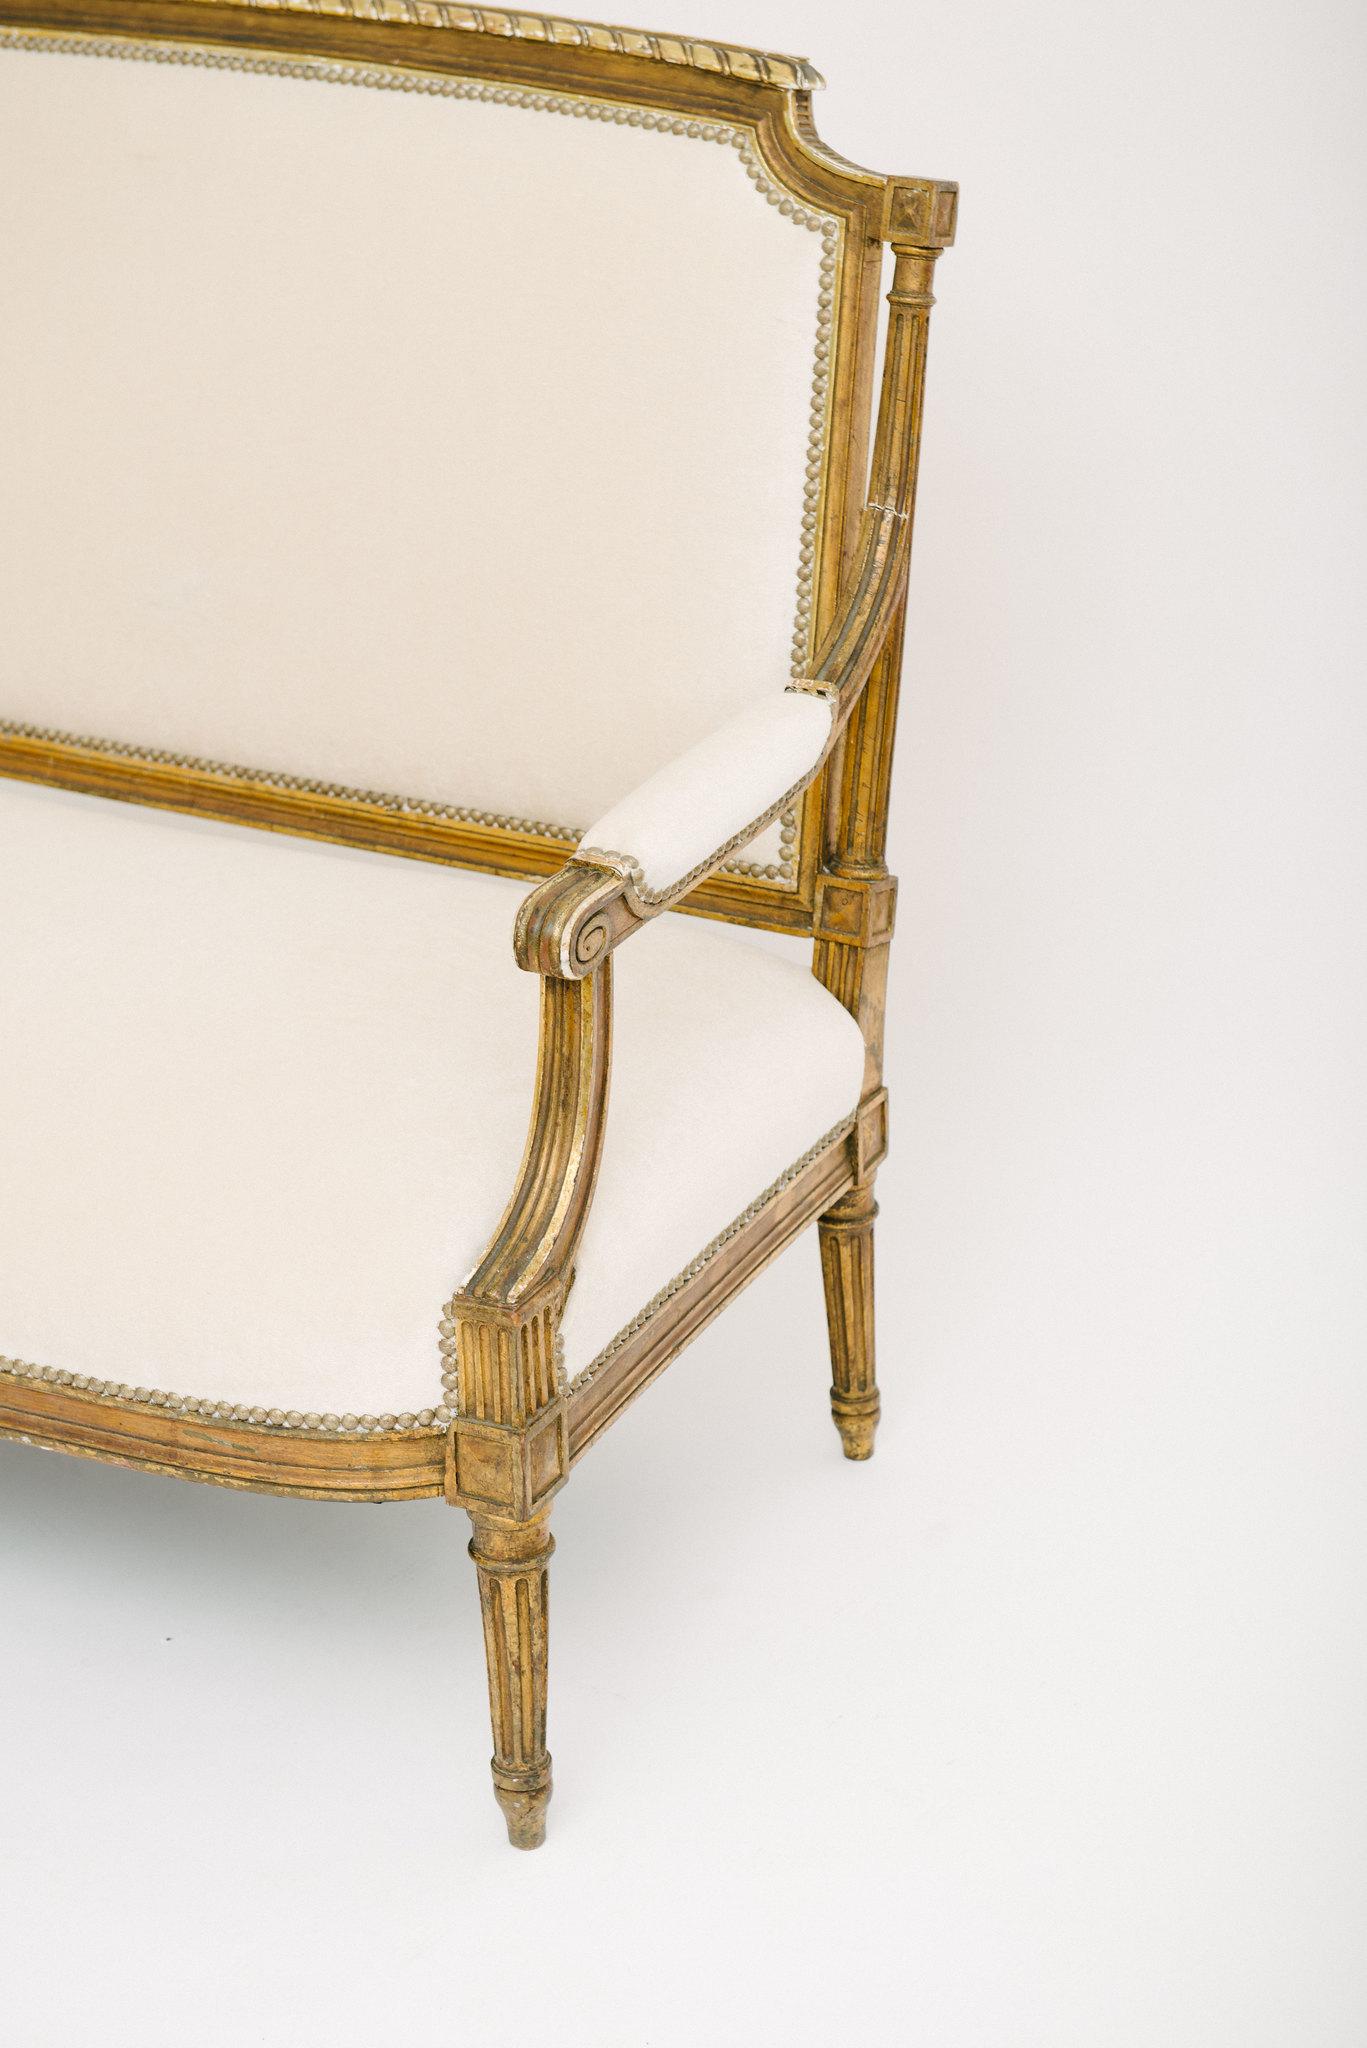 Mohair 19th Century Louis XVI Giltwood Settee For Sale